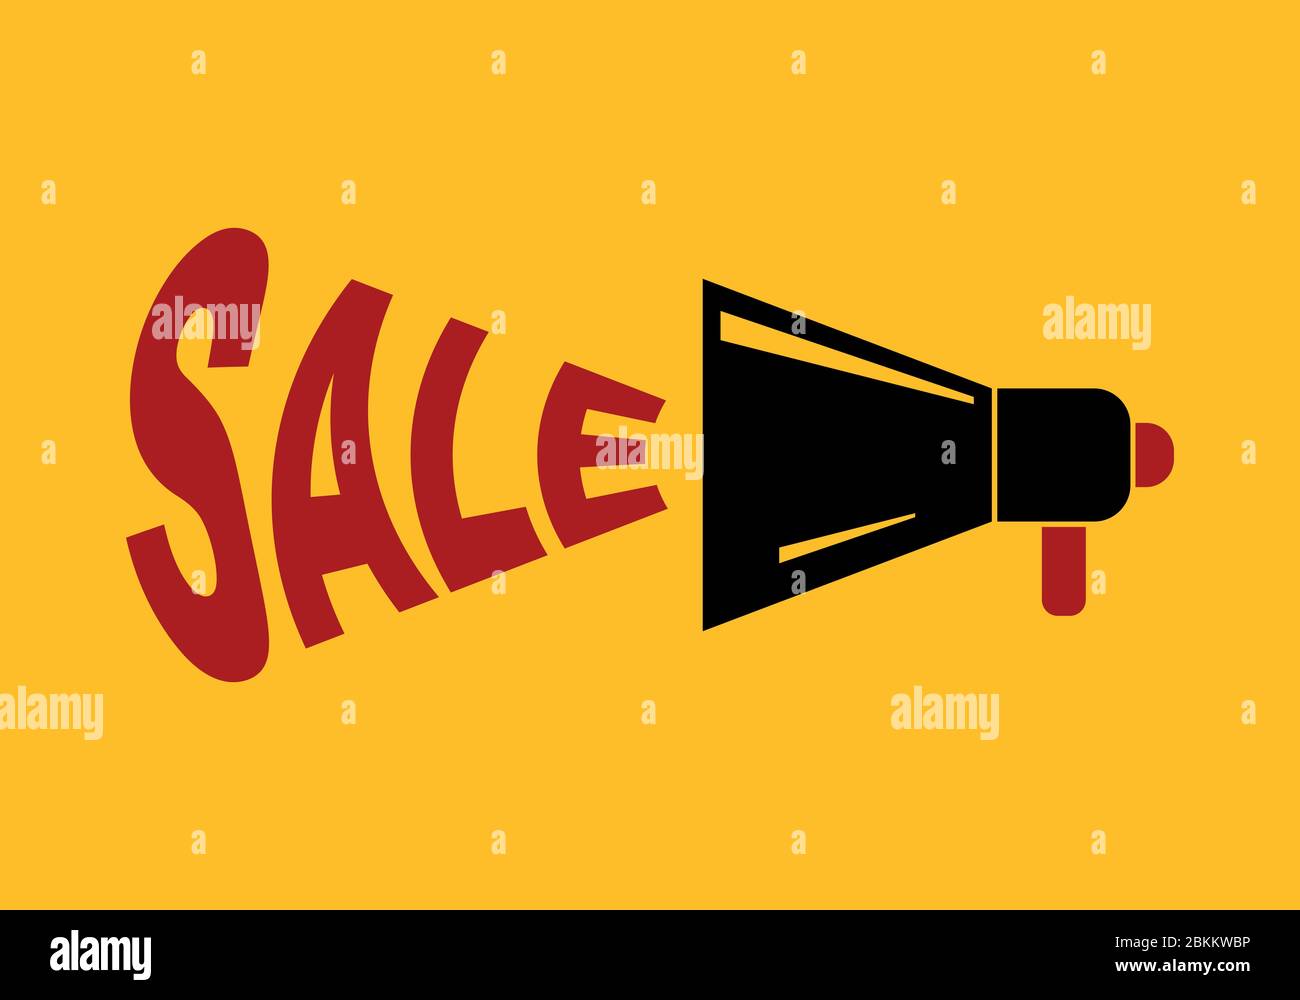 Sale vector word concept banner illustration Stock Vector